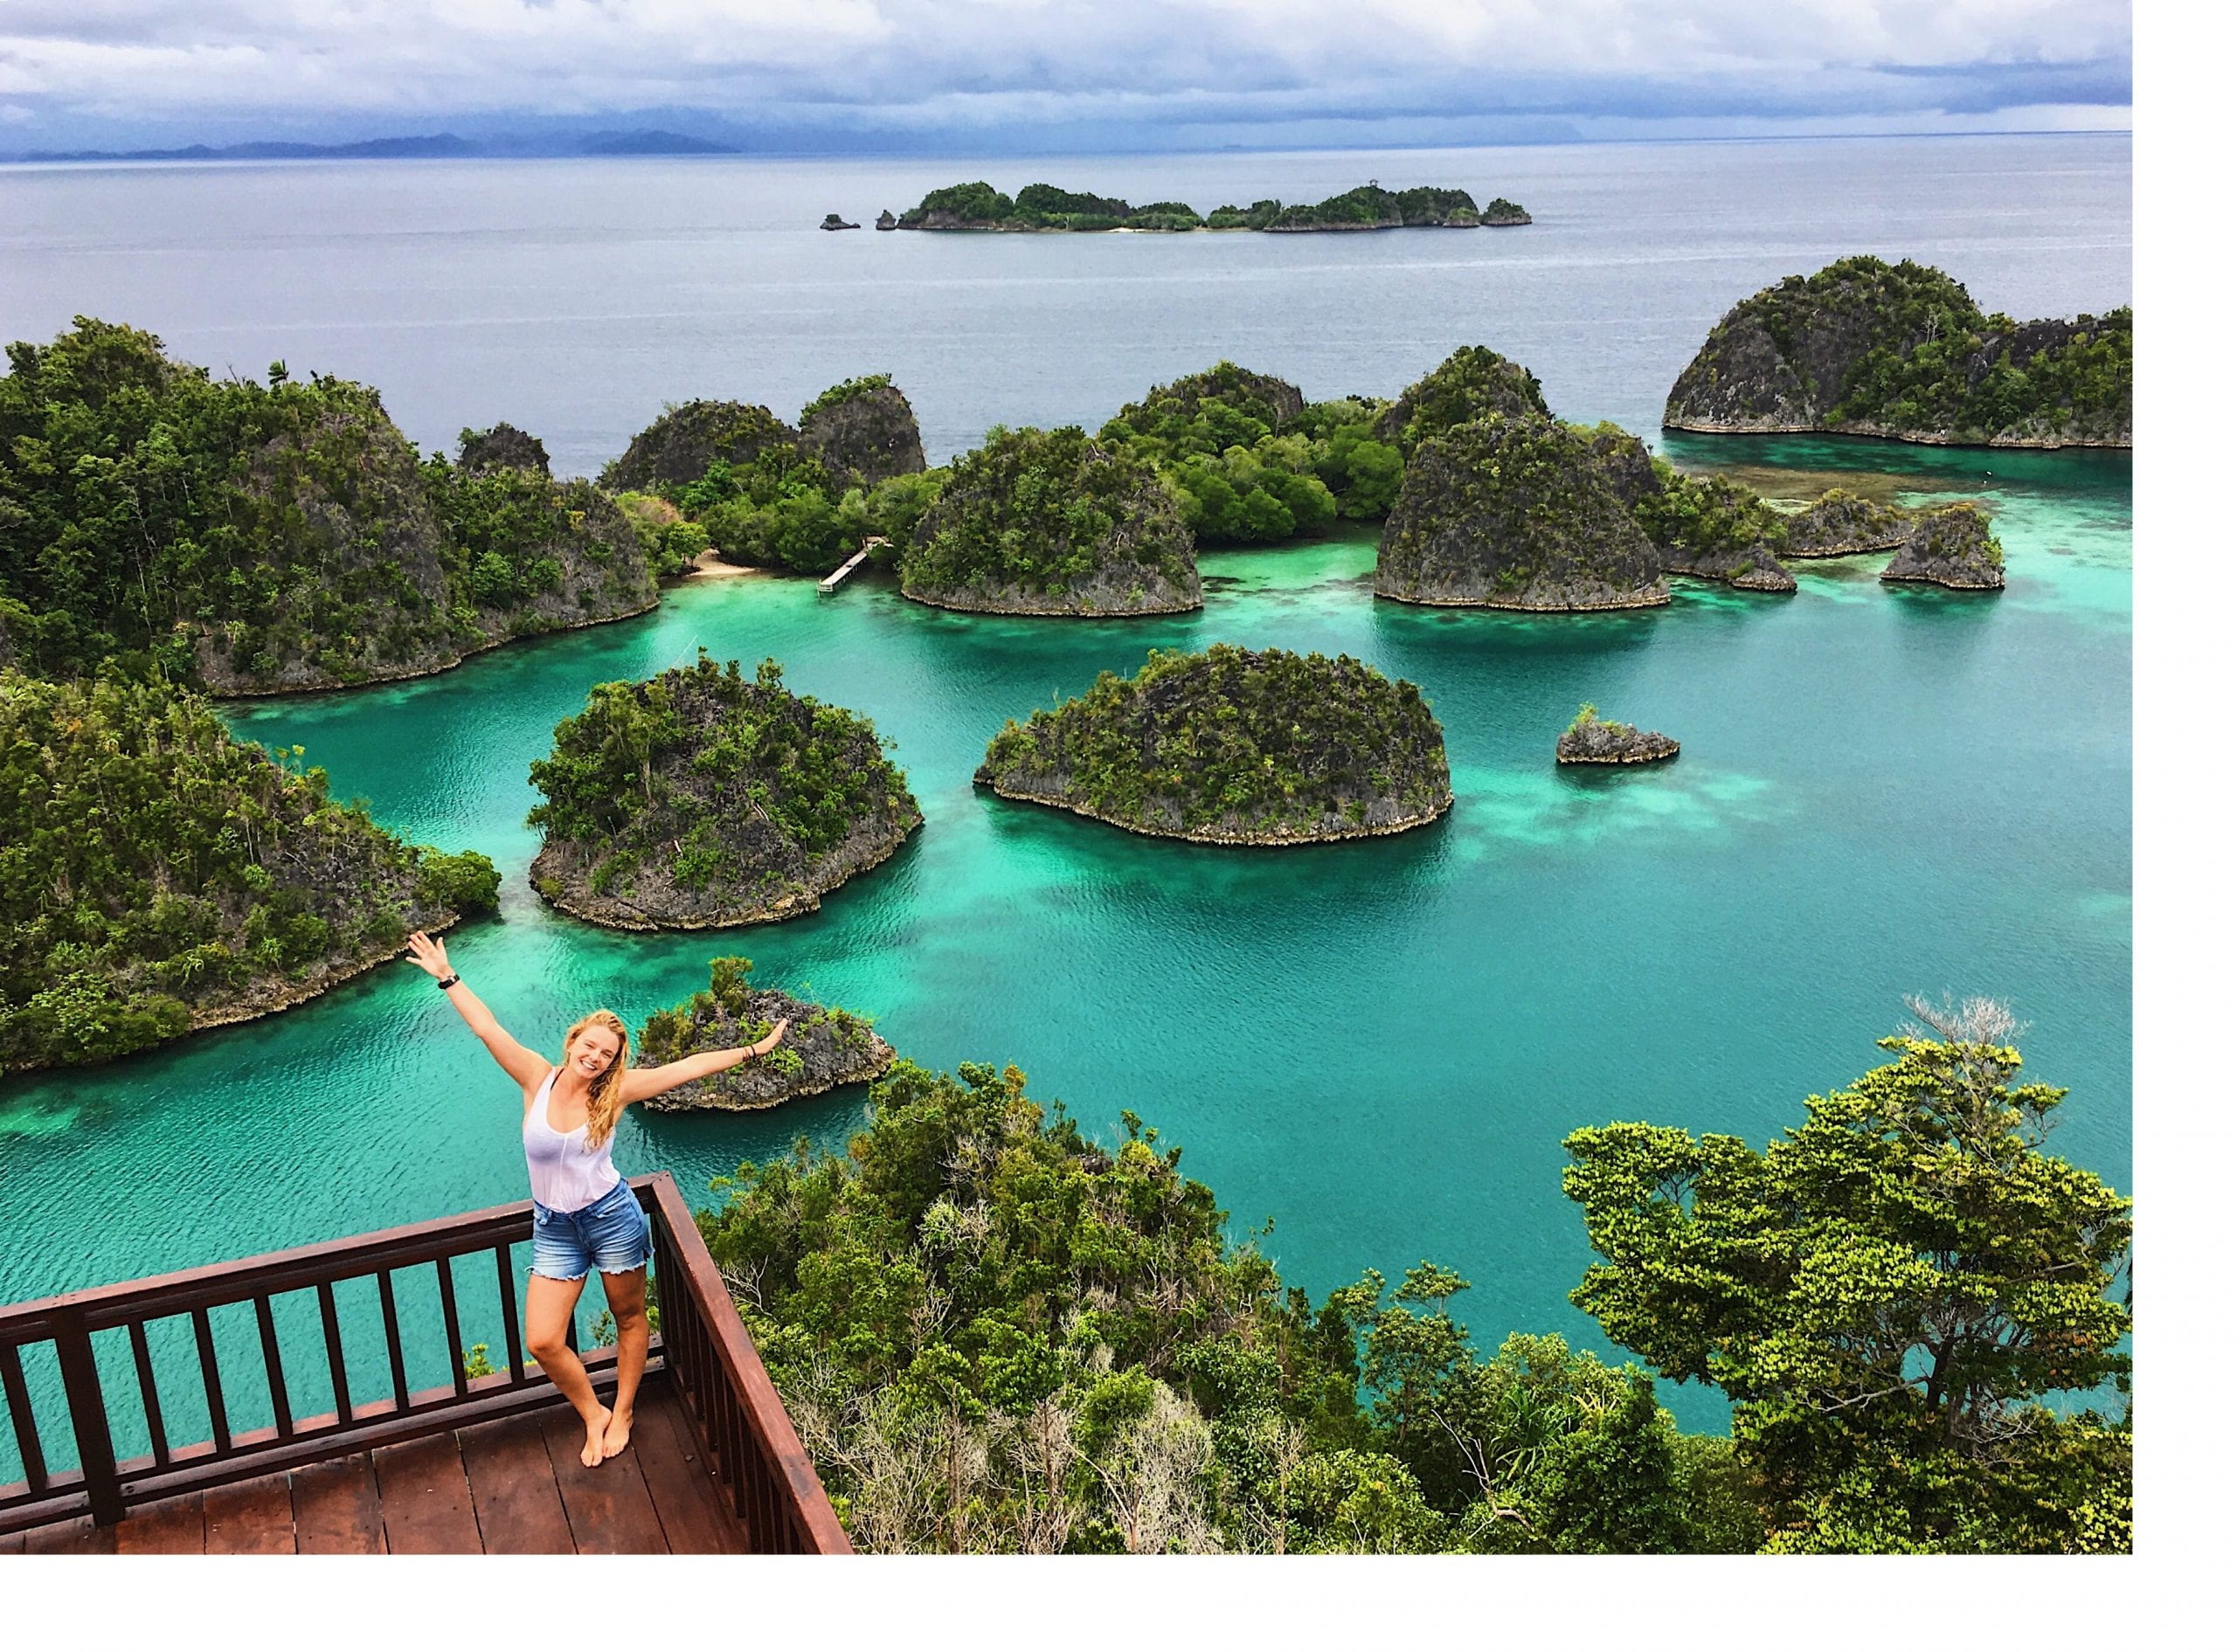 Chloe King stands on a balcony overlooking a series of small islands in Raja Ampat, West Papua